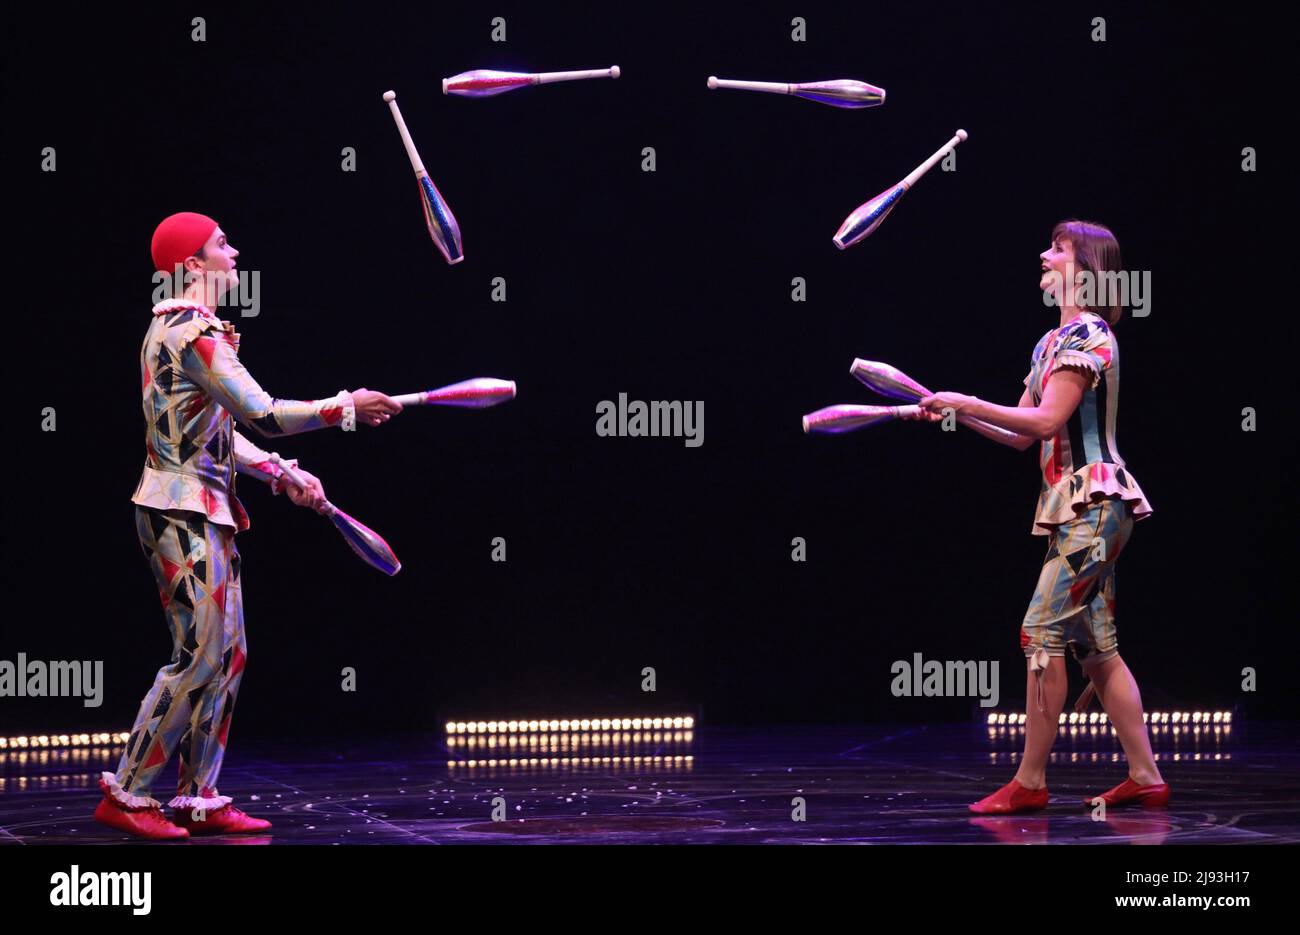 (220520) -- ZAGREB, May 20, 2022 (Xinhua) -- Artists perform during a preview of the Cirque du Soleil show 'Corteo' at Spaladium Arena in Split, Croatia, May 19, 2022. (Ivo Cagalj/PIXSELL via Xinhua) Stock Photo